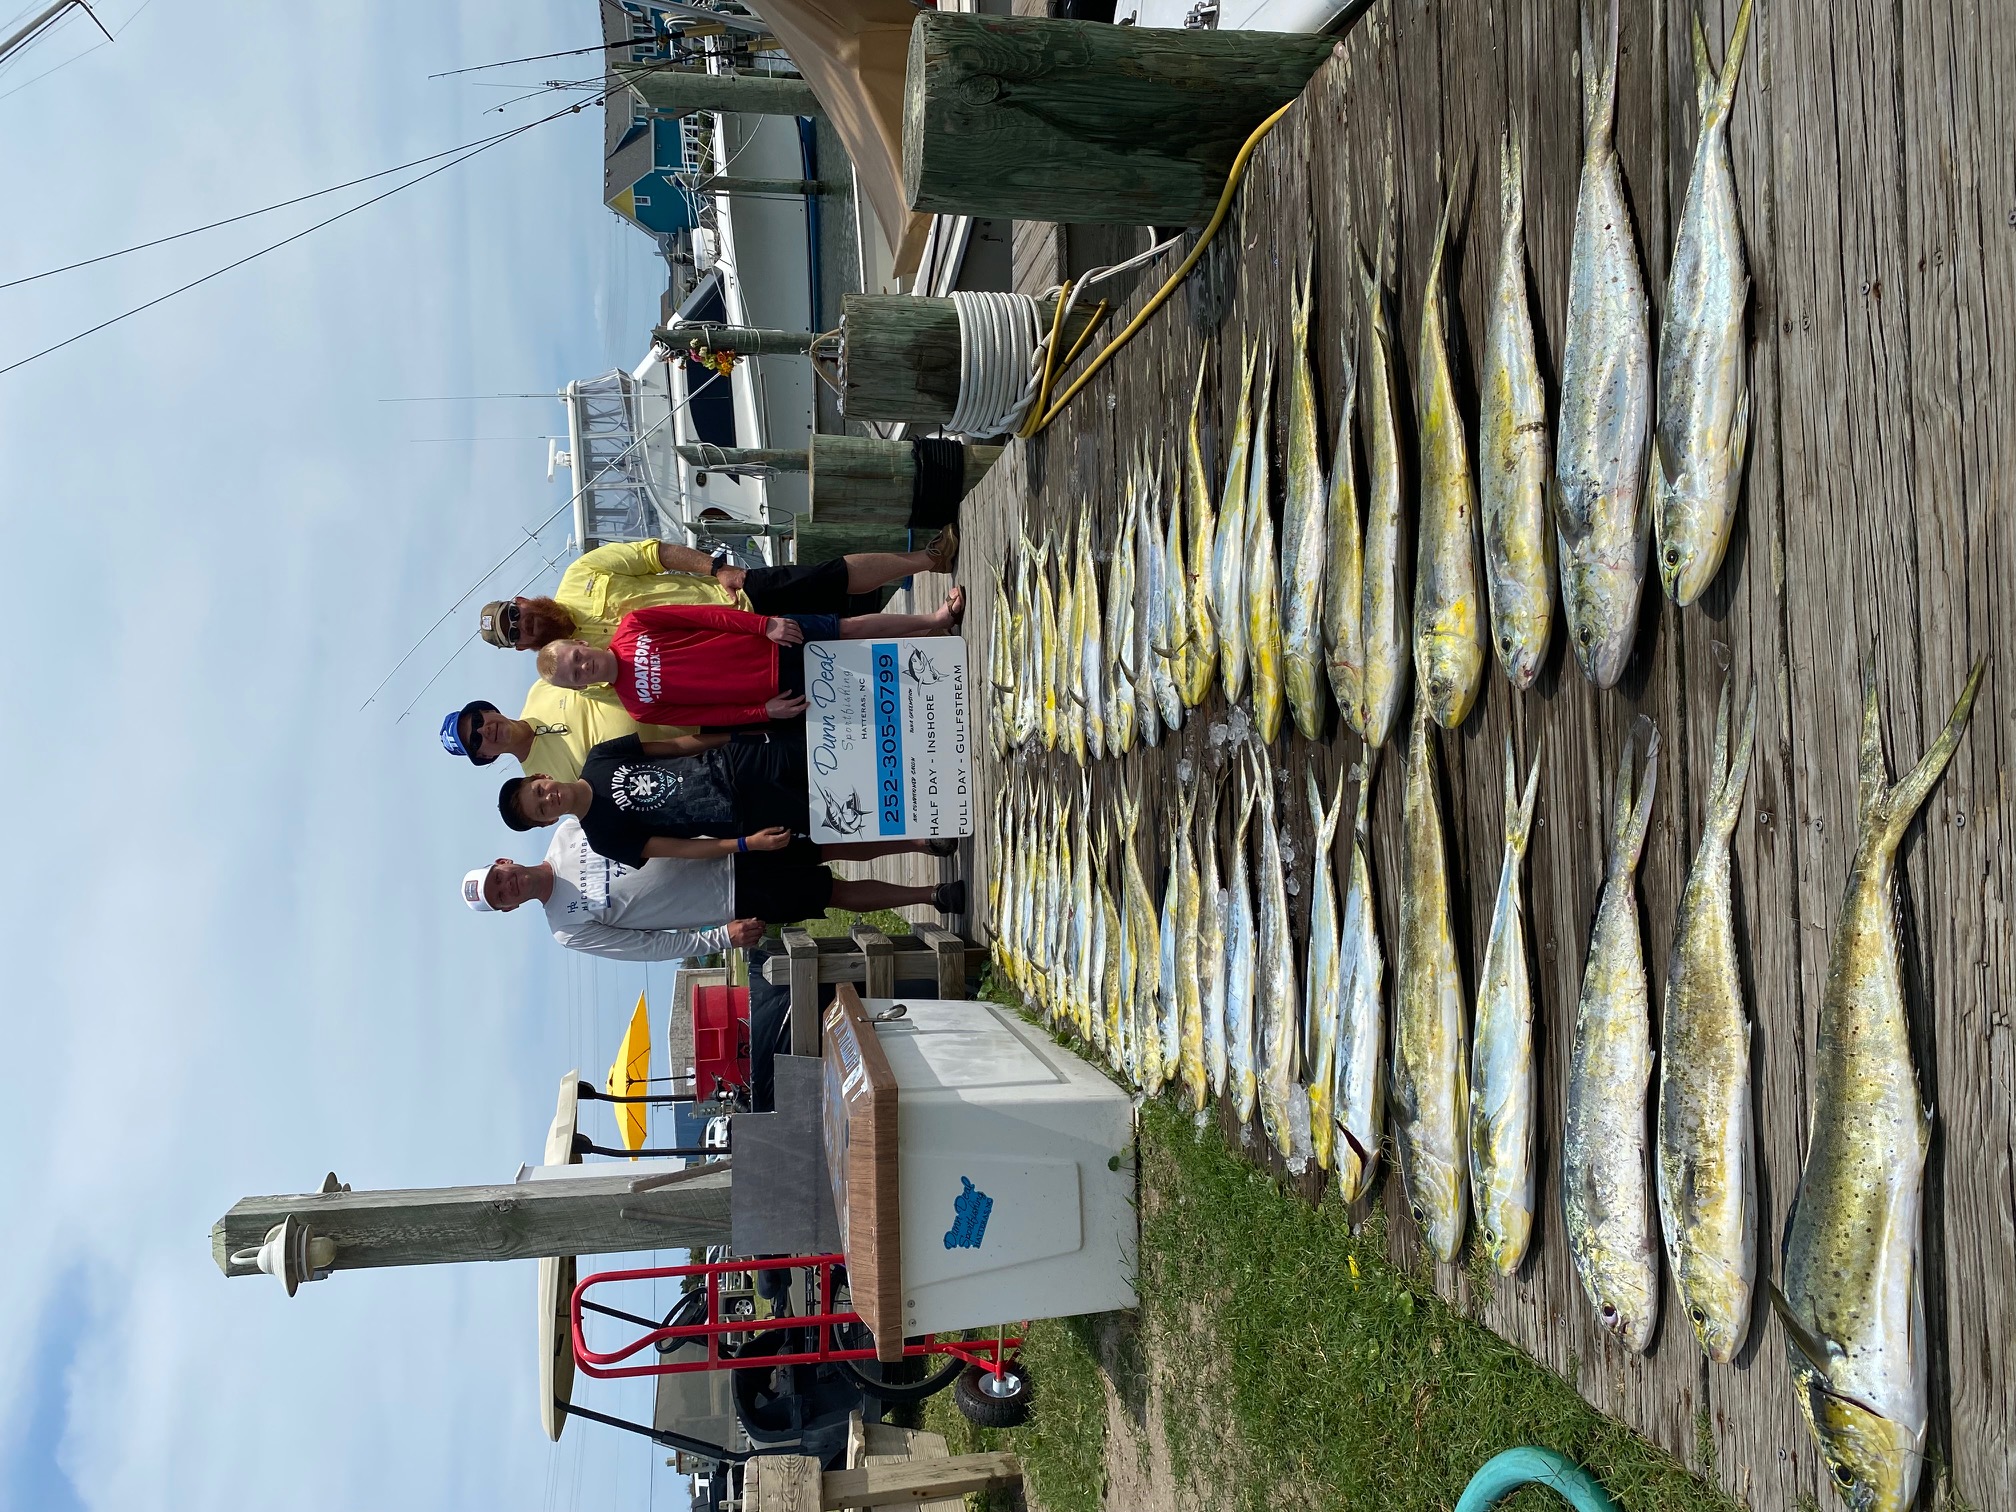 Dunn Deal Offshore Fishing Charters Hatteras OBX